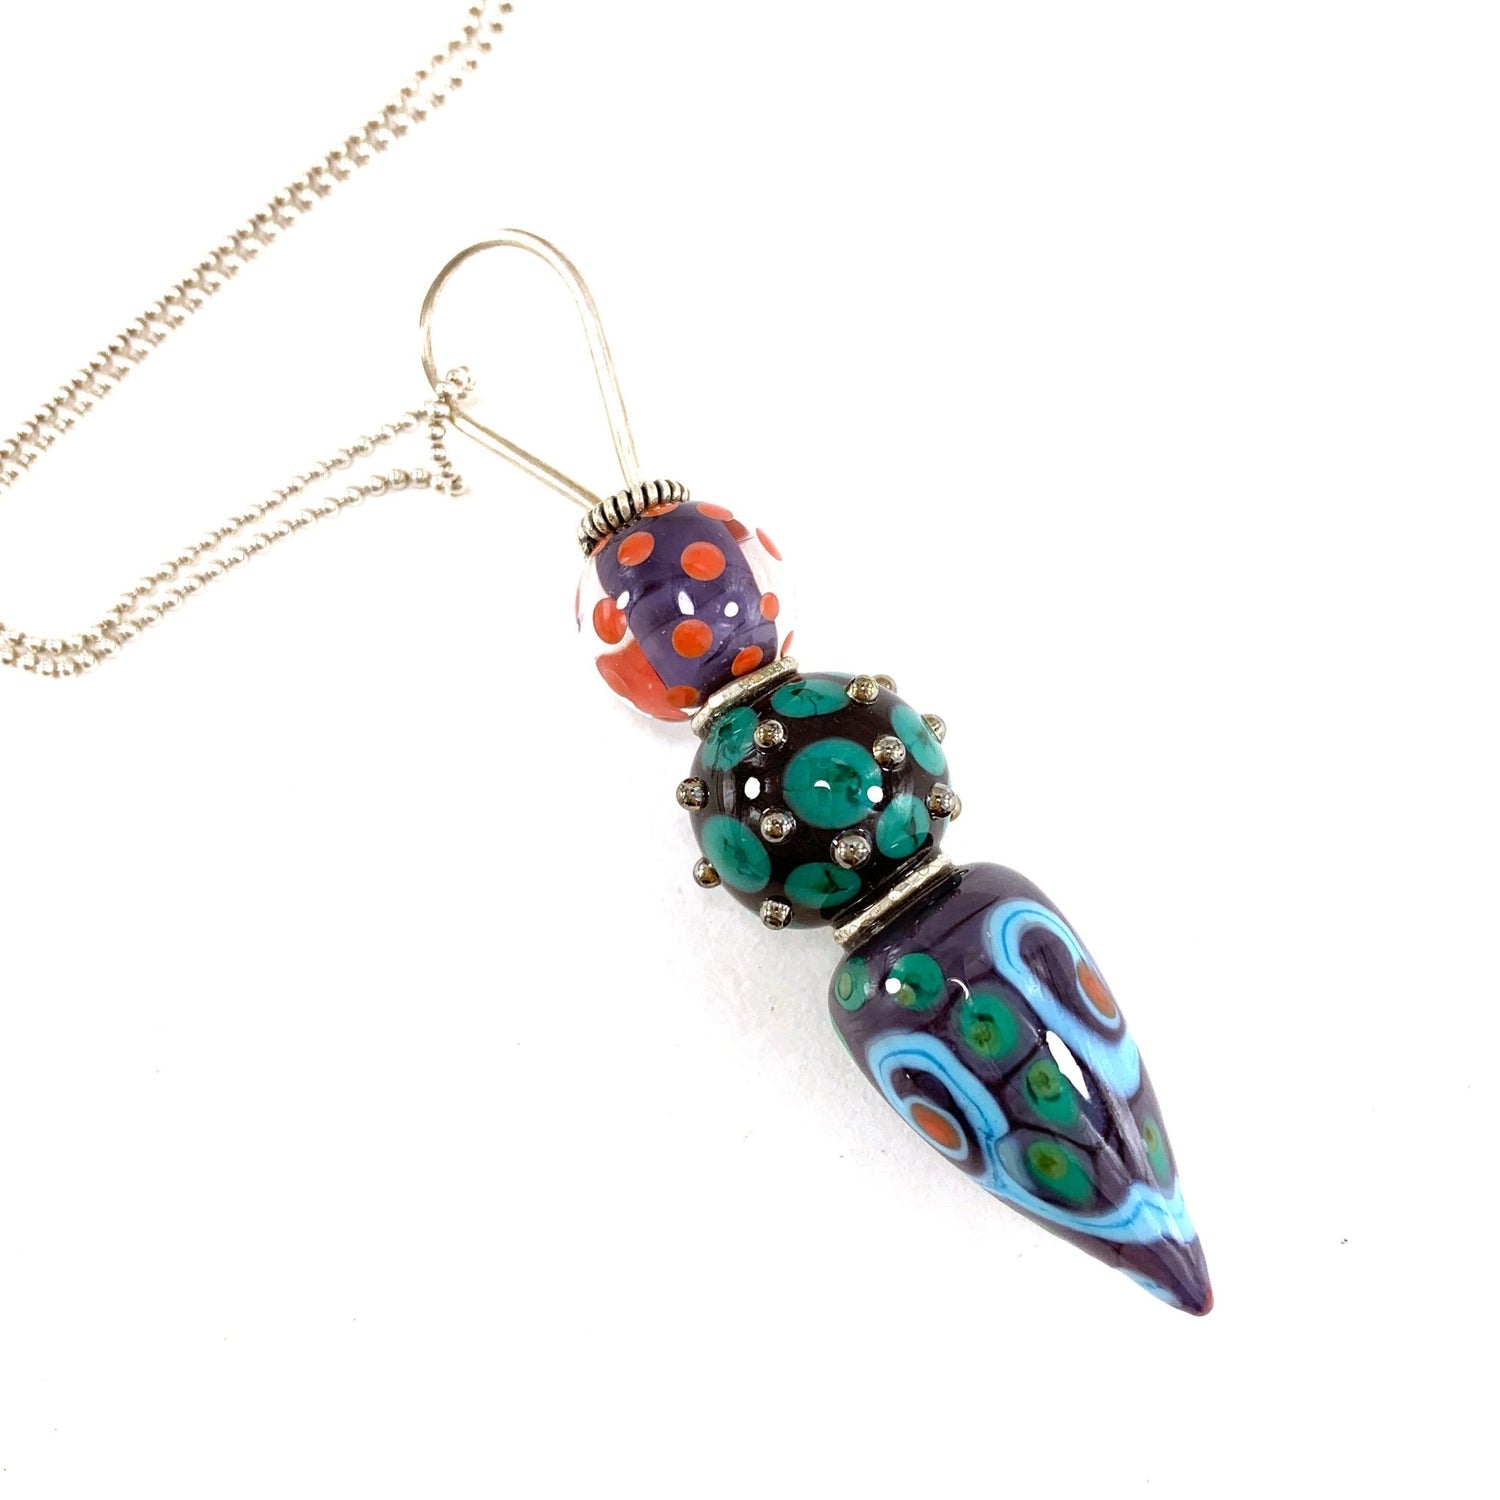 Stacked Bead Pendant in 9 Colors - The Glass Acorn